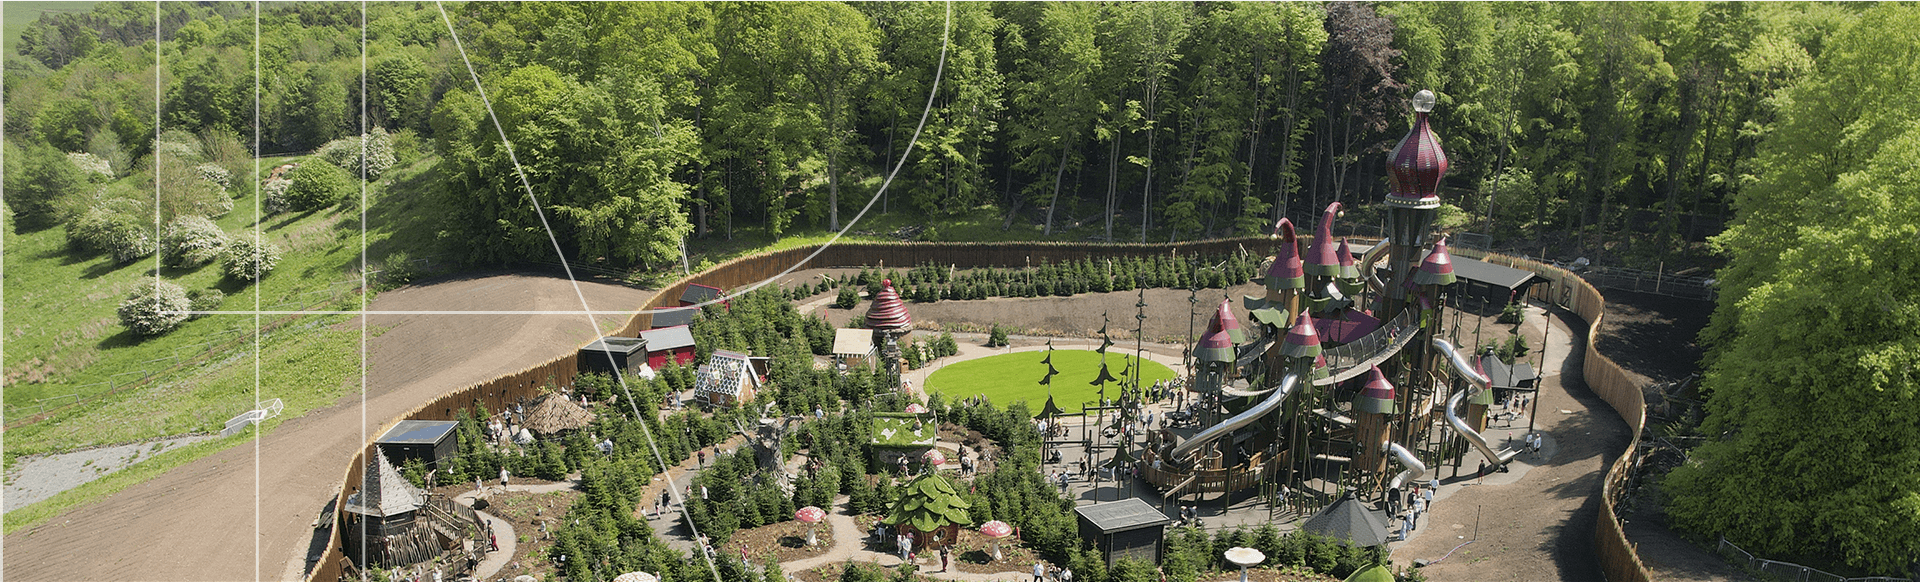 Aerial view of lush landscaped garden